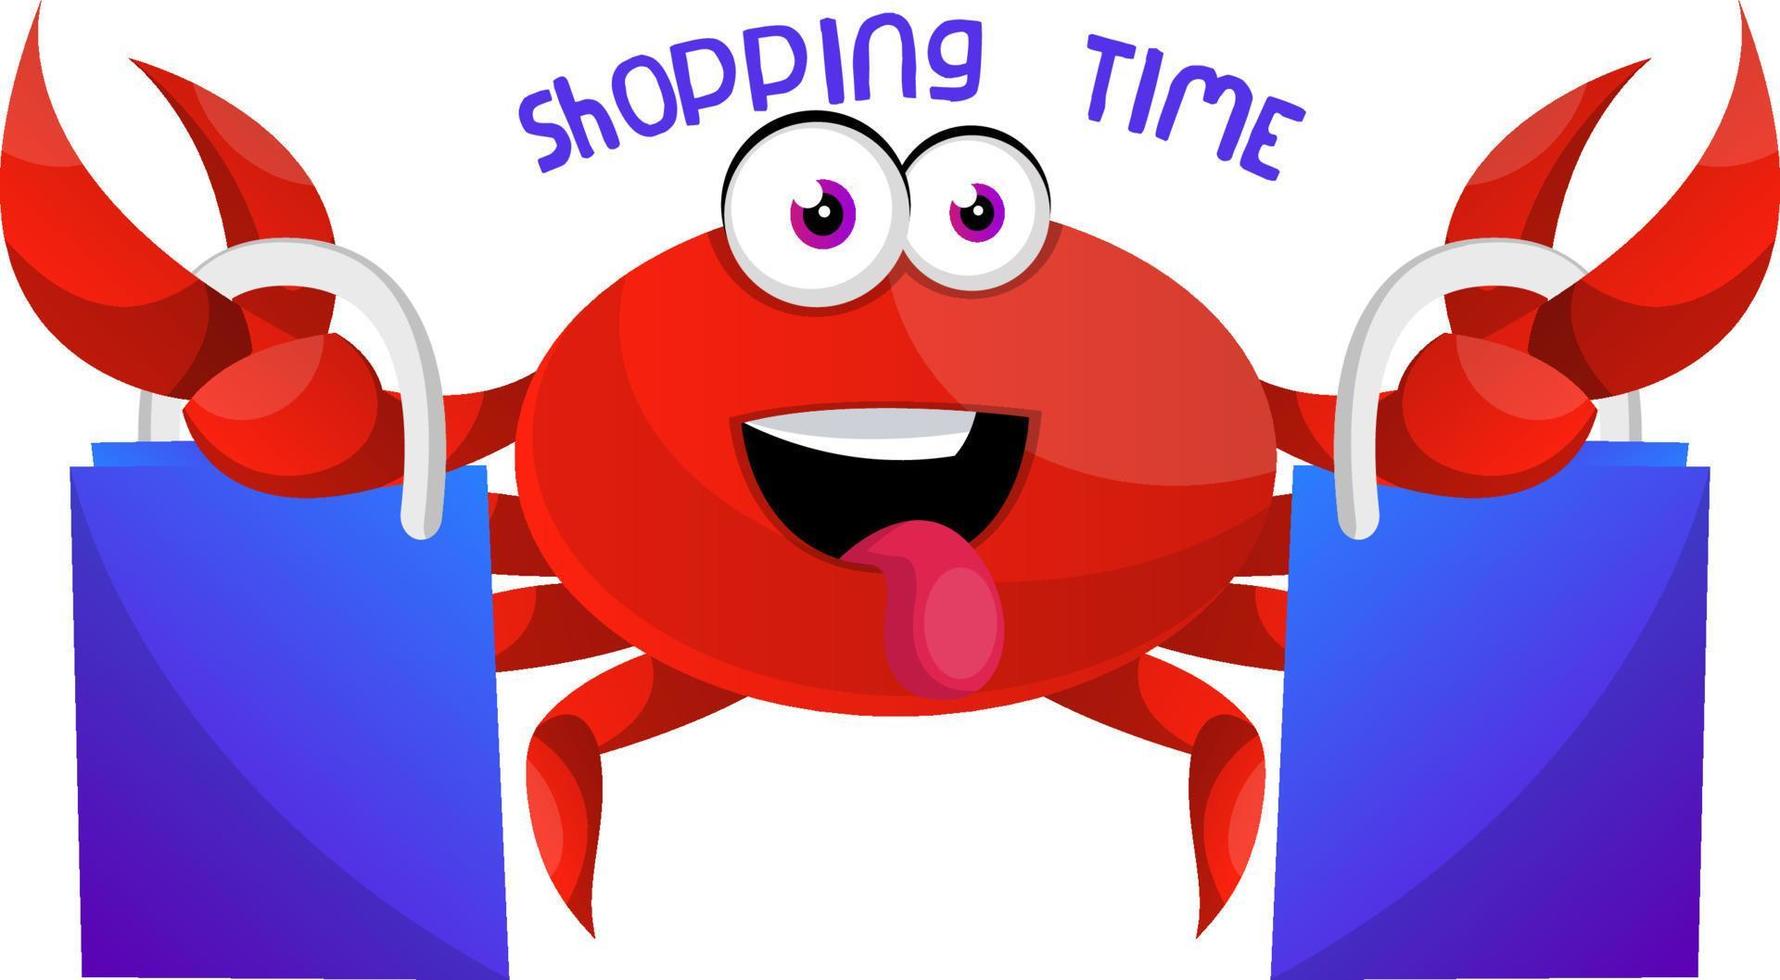 Crab with bags, illustration, vector on white background.